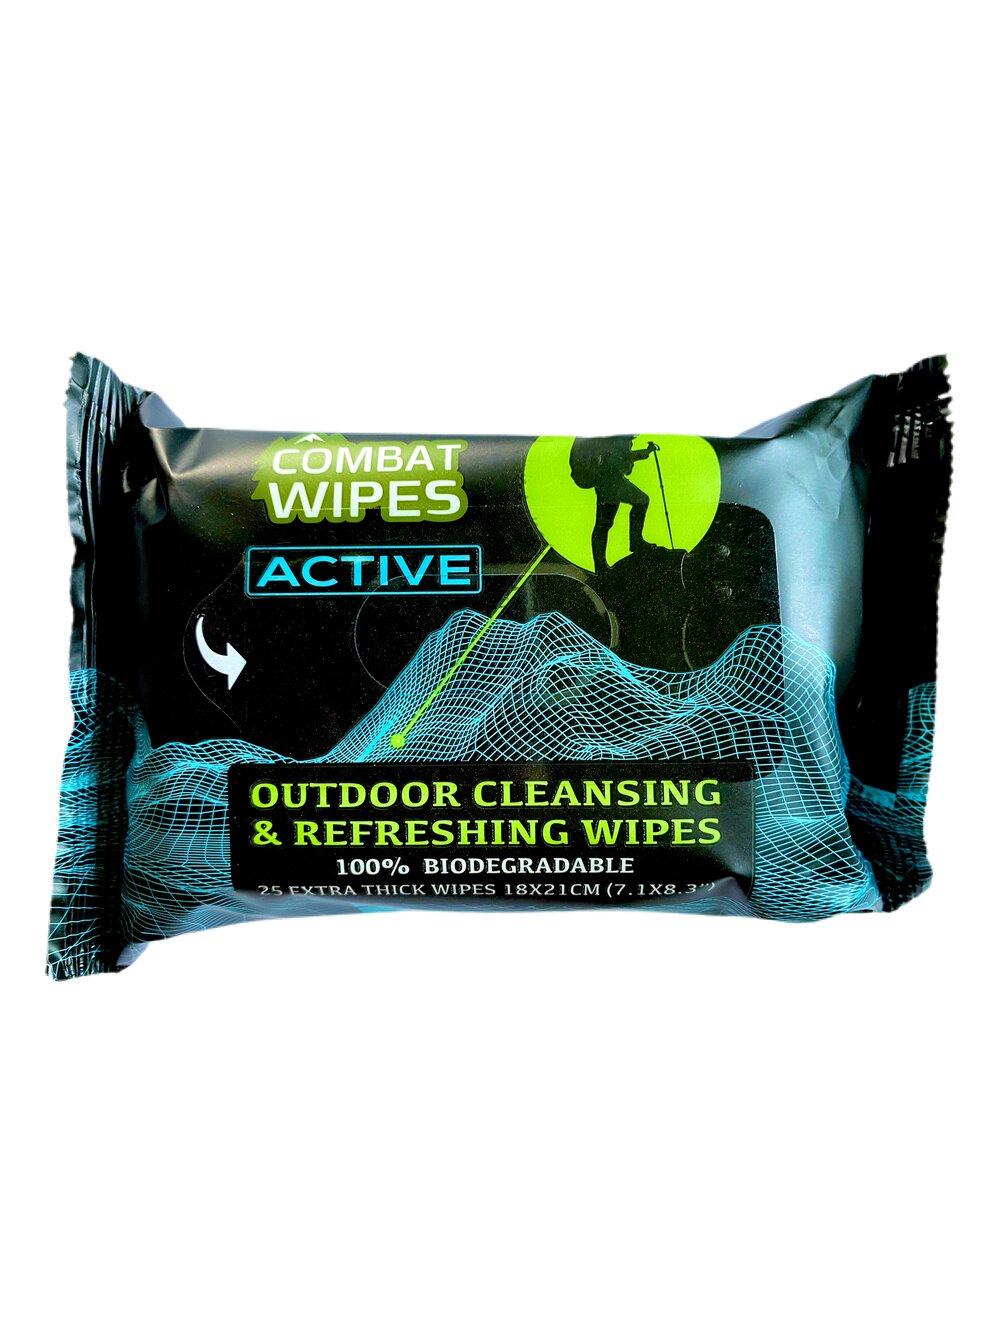 Biodegradable Wipes